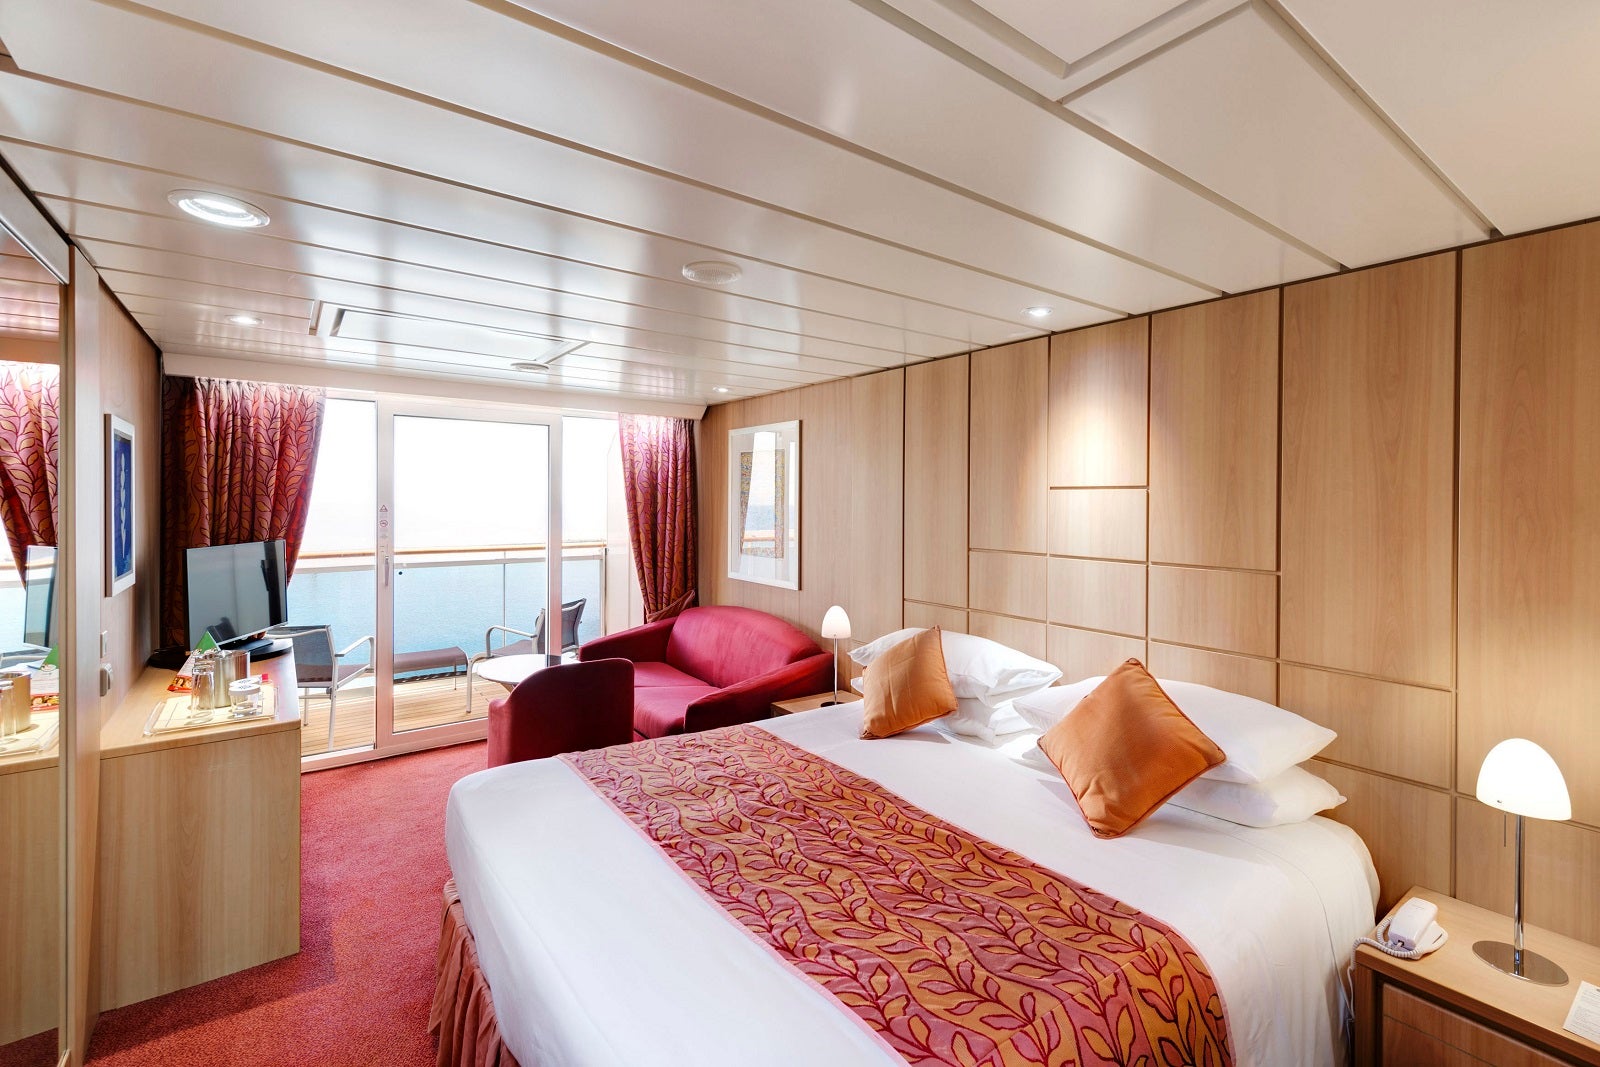 A cruise ship cabin with red decor, wood accents and view of the balcony